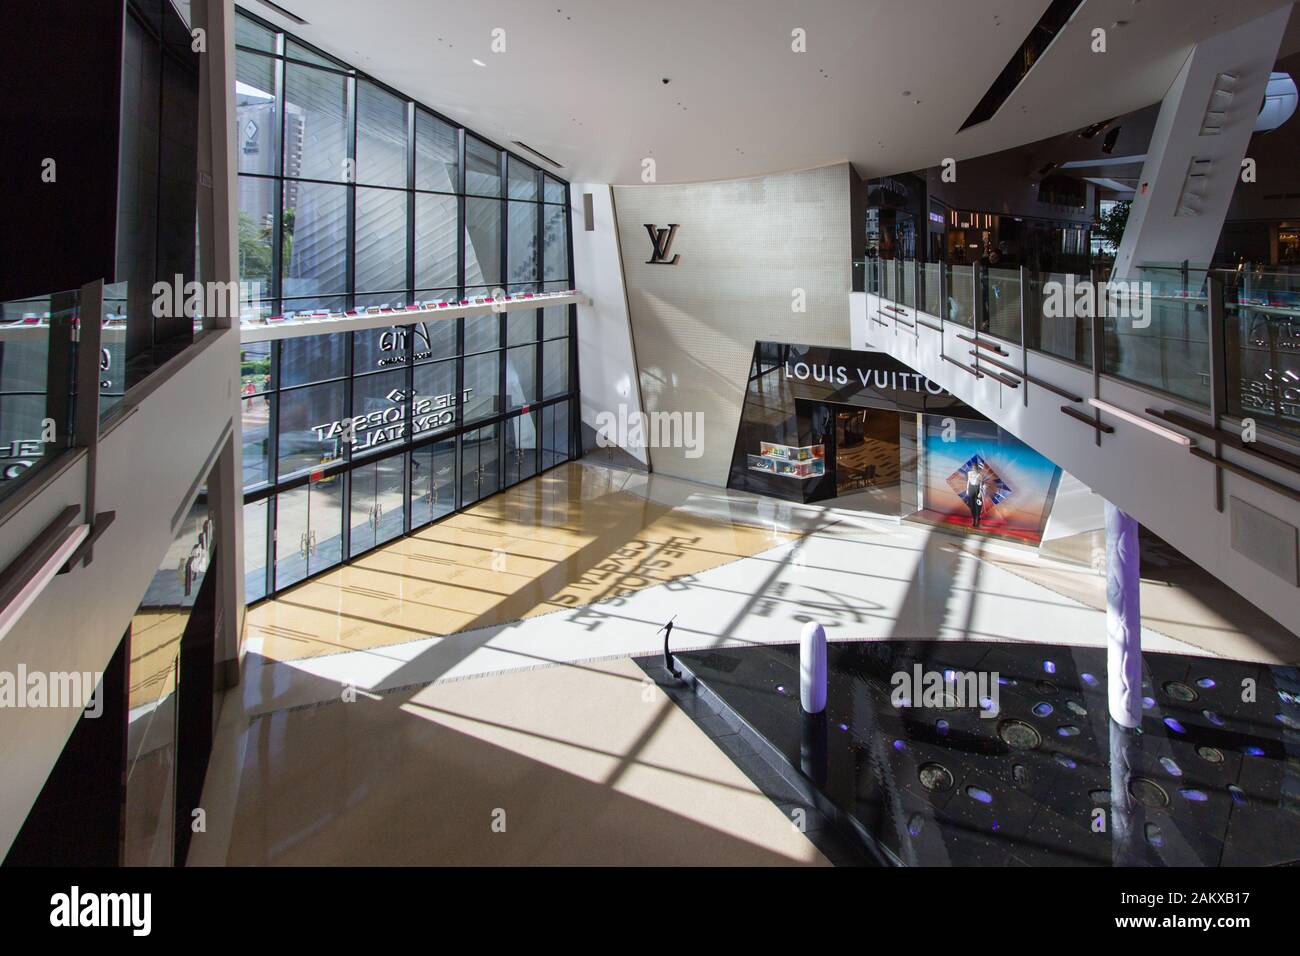 Las Vegas, Nevada, USA - May 6, 2019: Exterior storefront of the Louis Vuitton store at the Crystals shops in the City Center of the Las Vegas Strip. Stock Photo